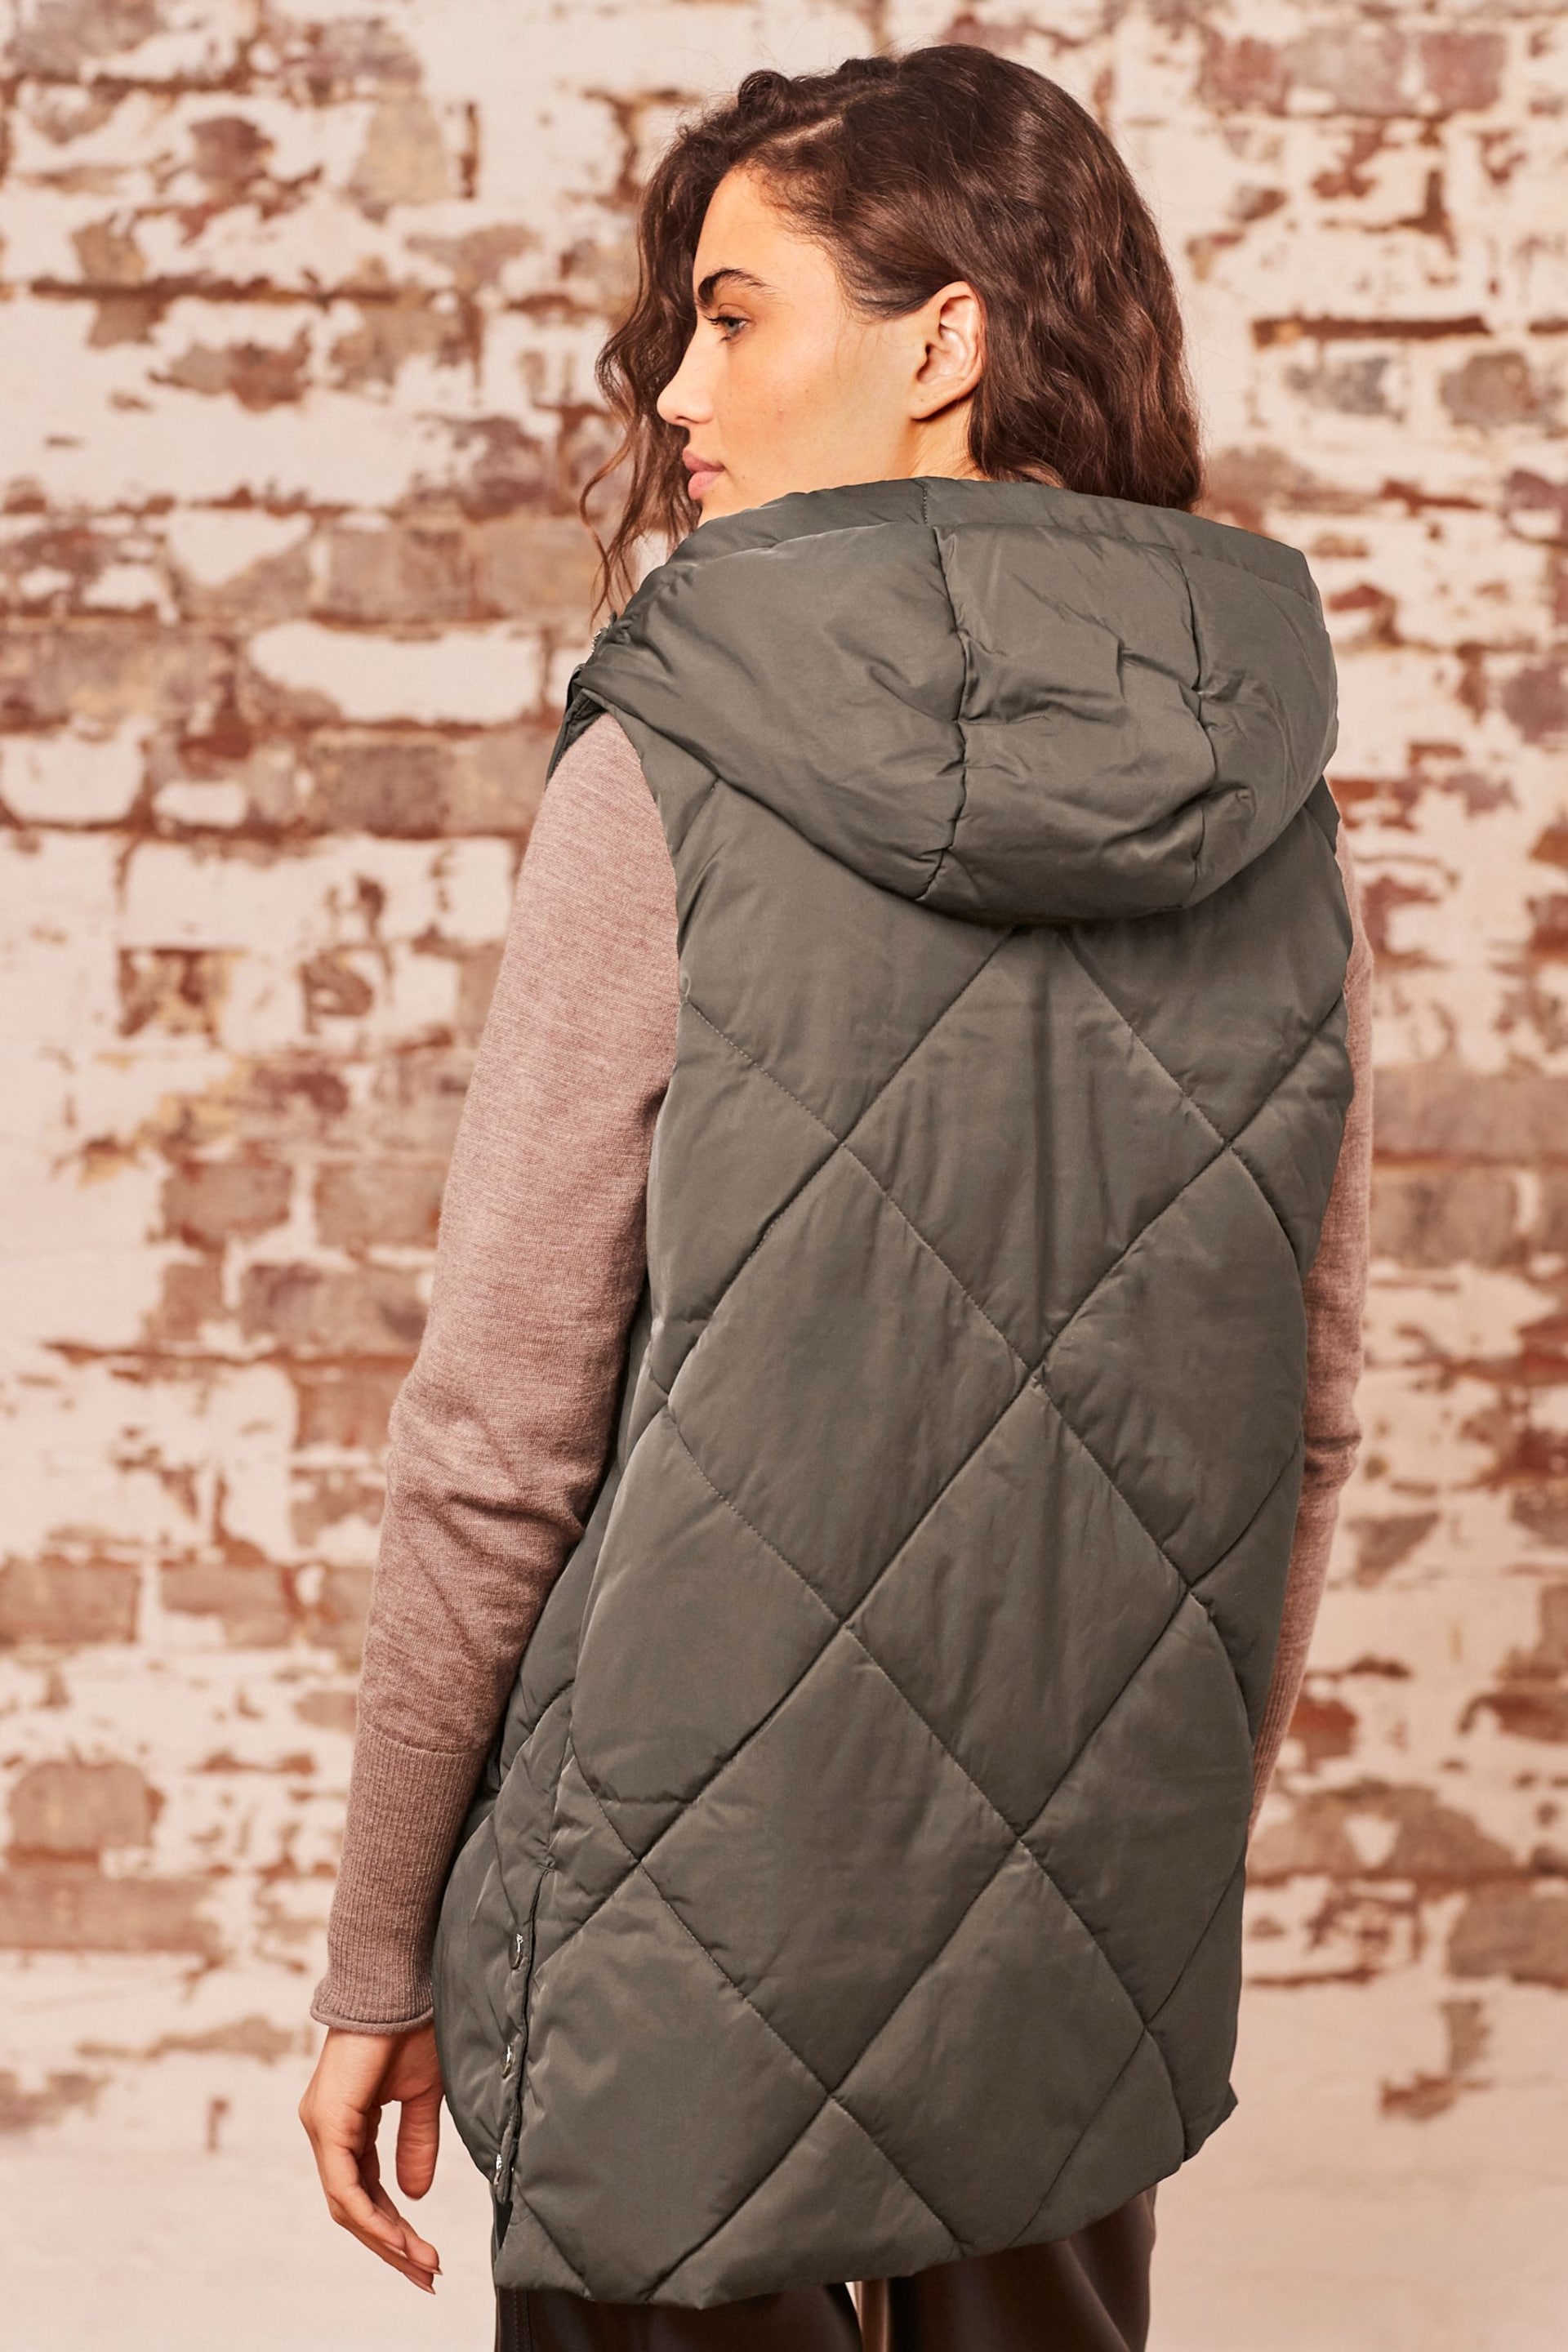 Khaki Green Quilted Gilet - Image 4 of 7